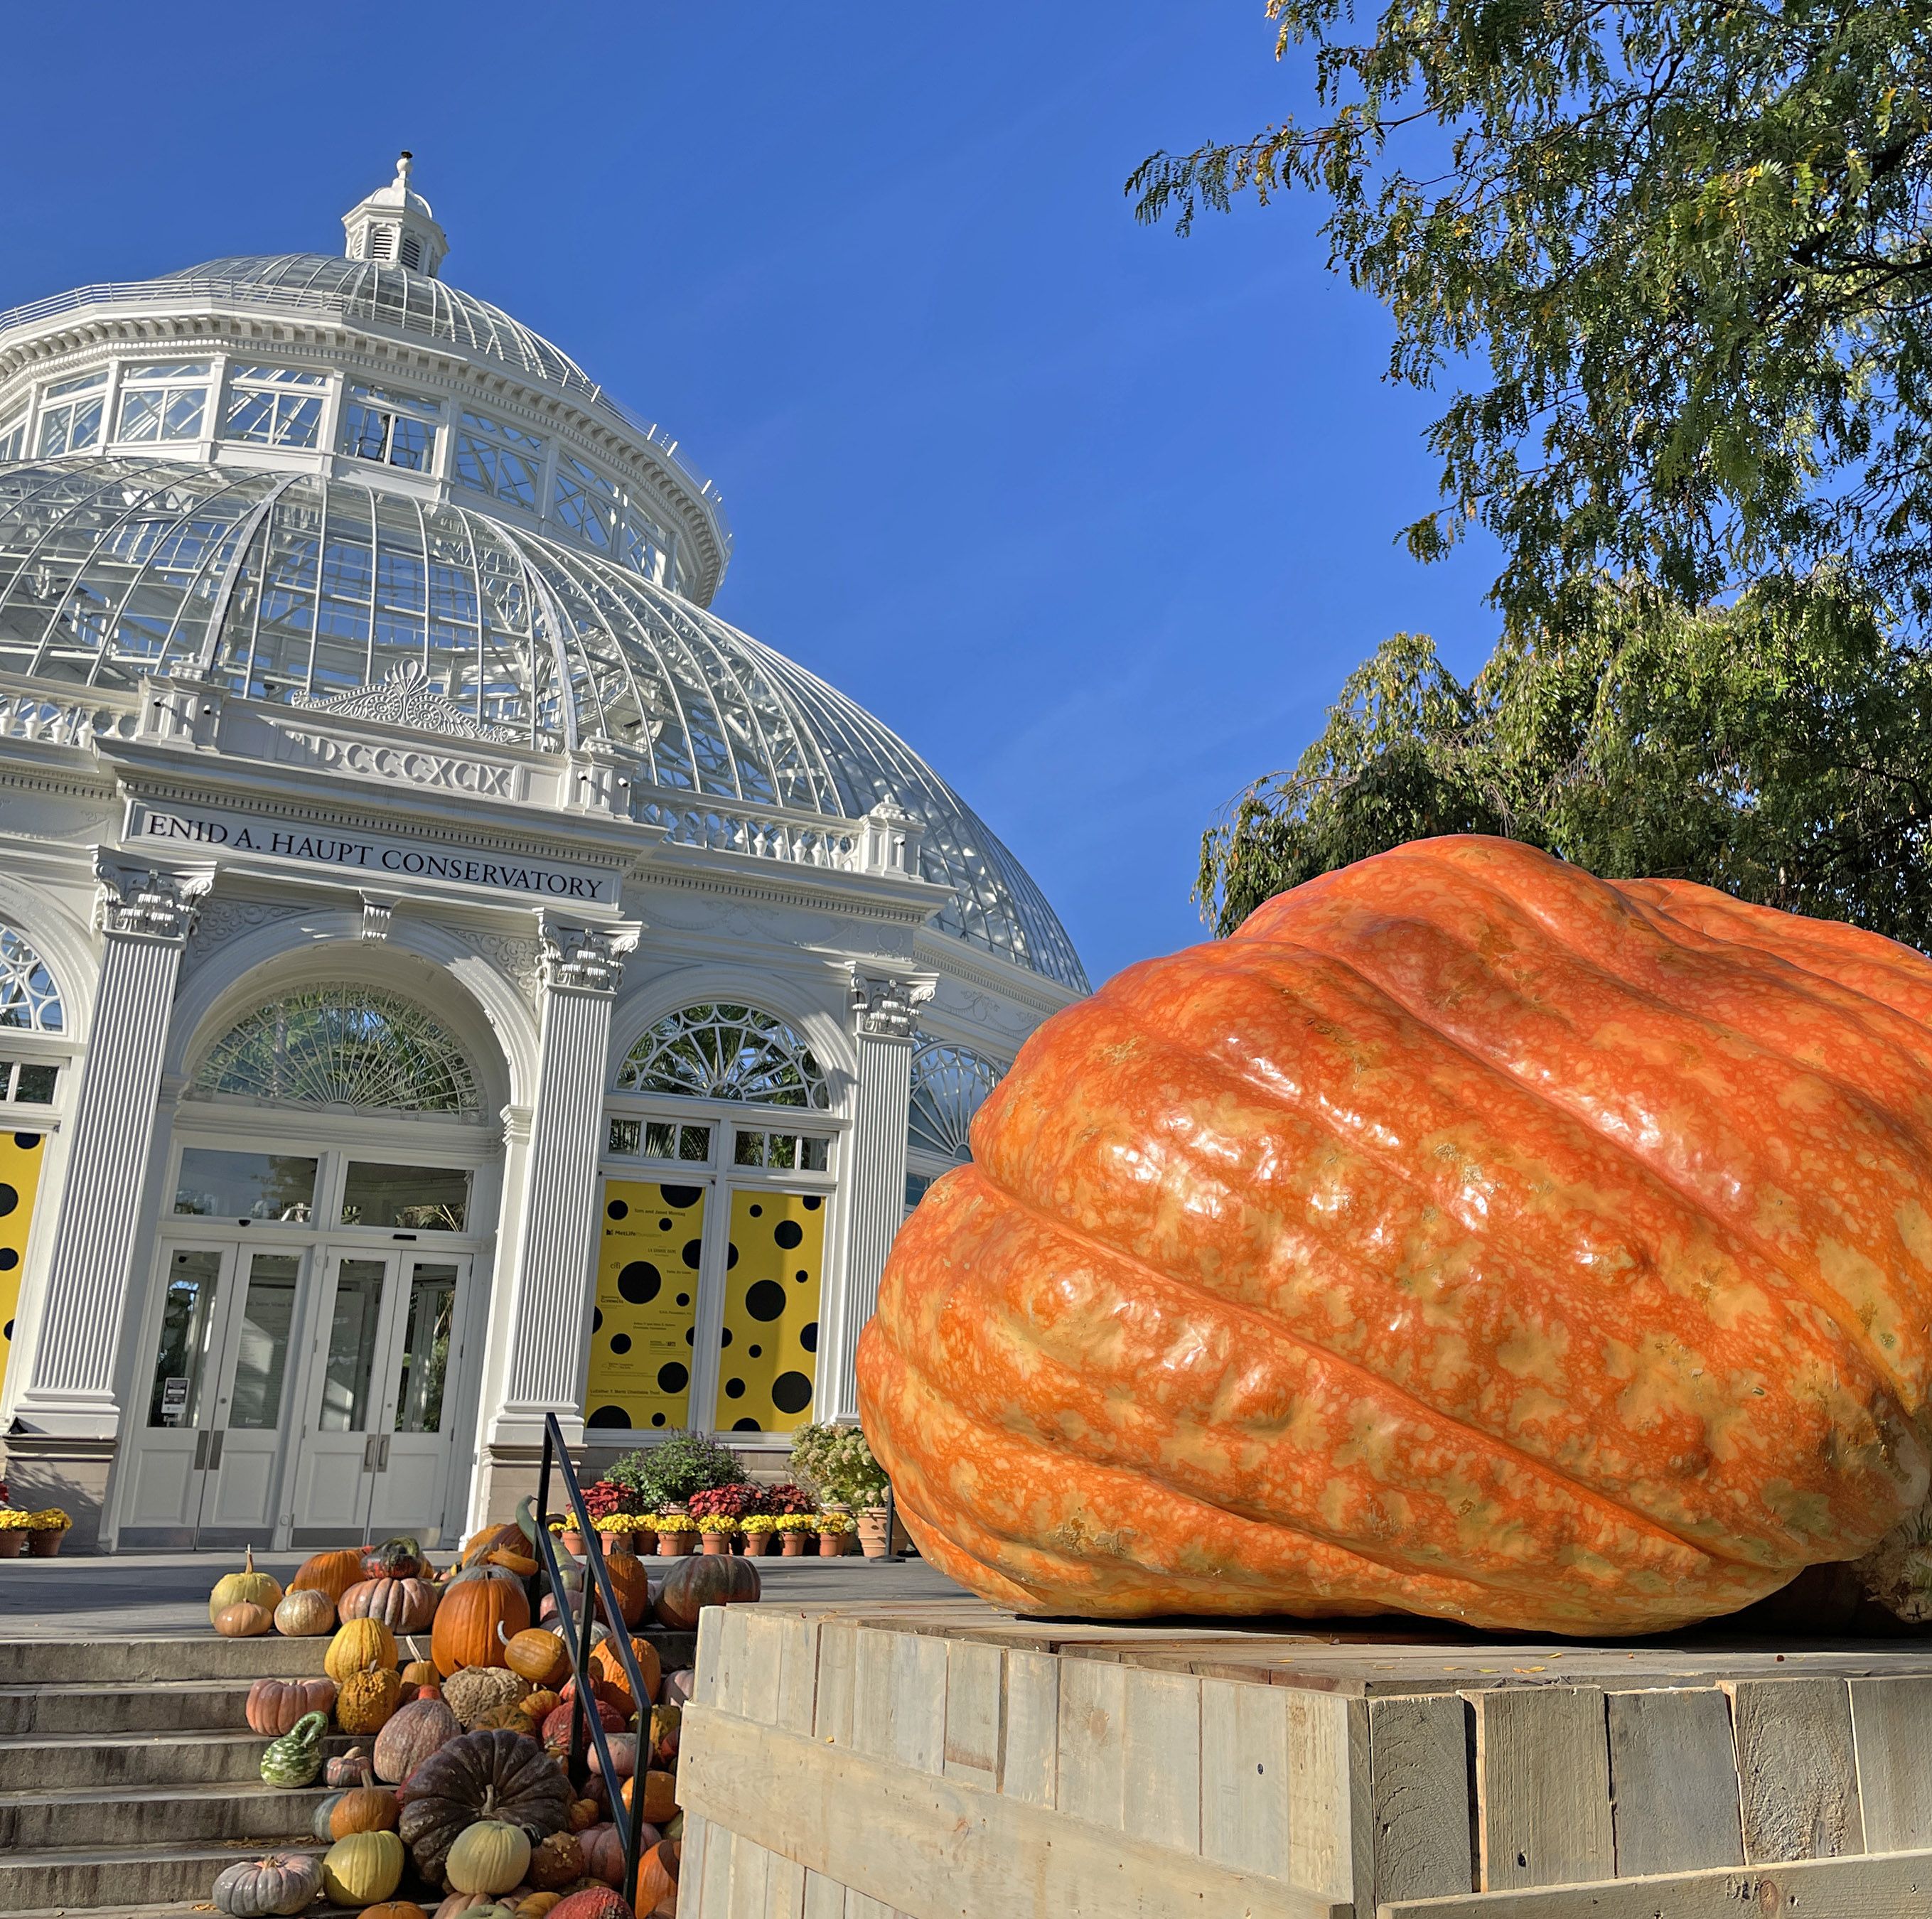 These Gigantic Pumpkins Are on Display at the New York Botanical Garden Through Halloween